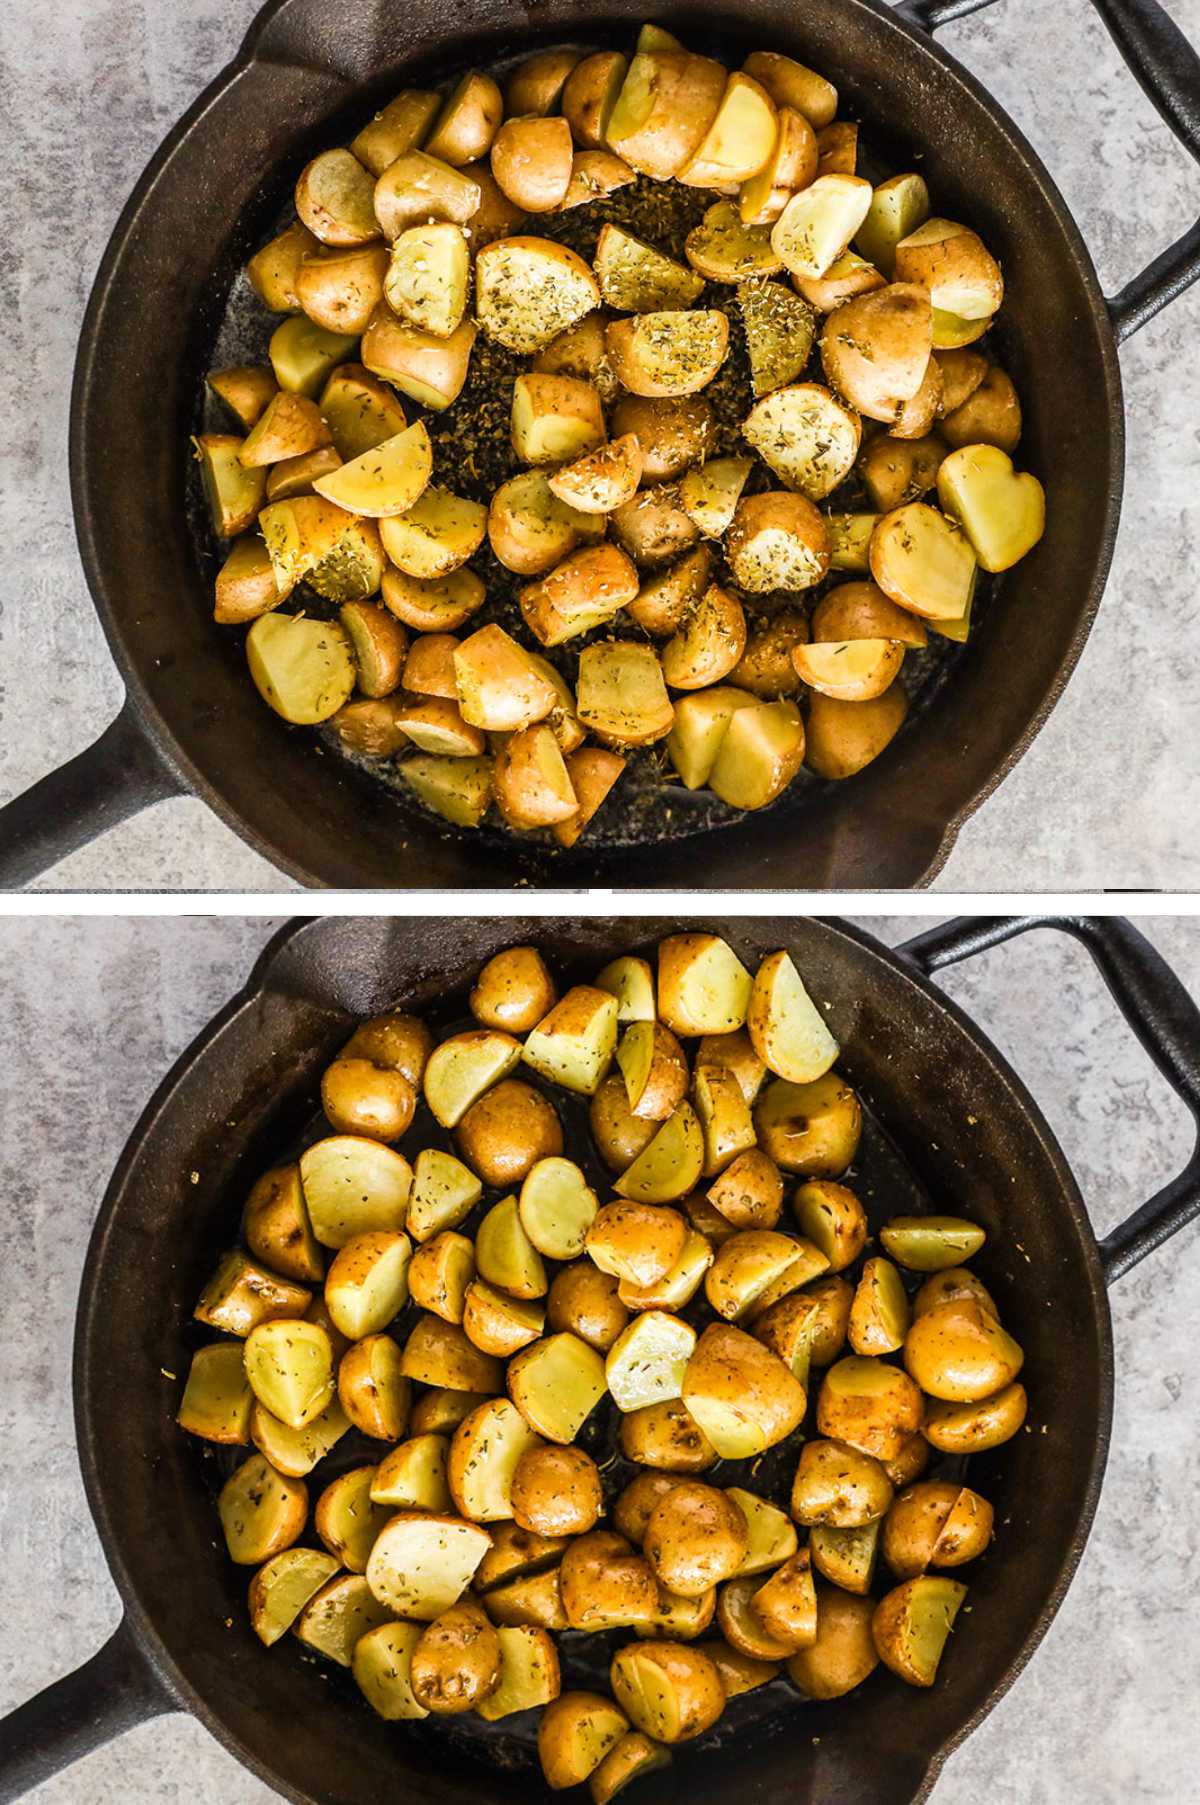 Two overhead images in one: 1. Potatoes in cast iron pan with seasoning before cooking. 2. Potatoes in cast iron pan with seasoning after cooking.